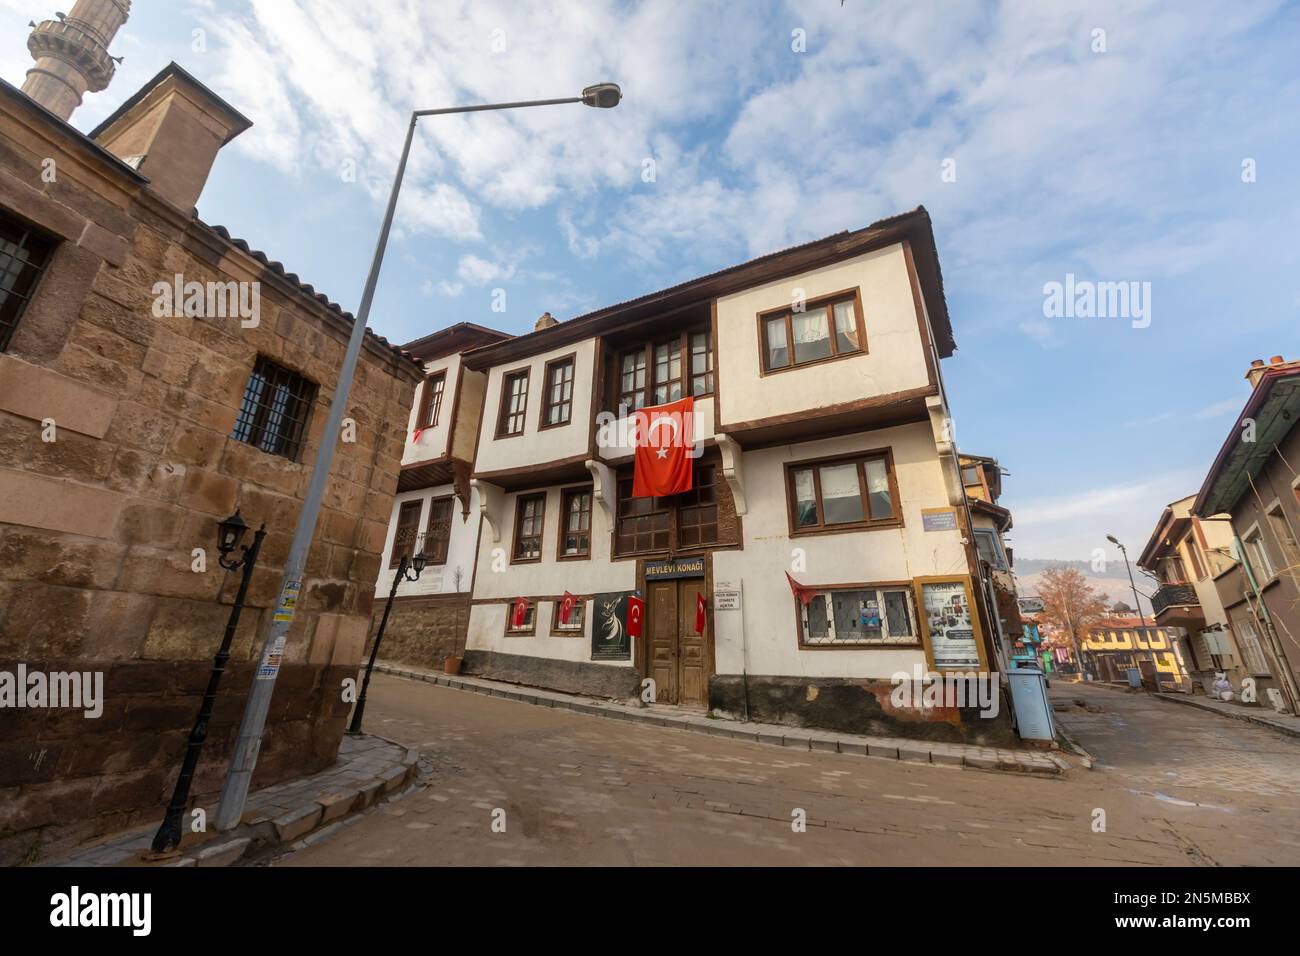 Street with traditional turkish ottoman houses in Afyonkarahisar old town. Afyonkarahisar cityscape Afyon castle on the rock, Stock Photo